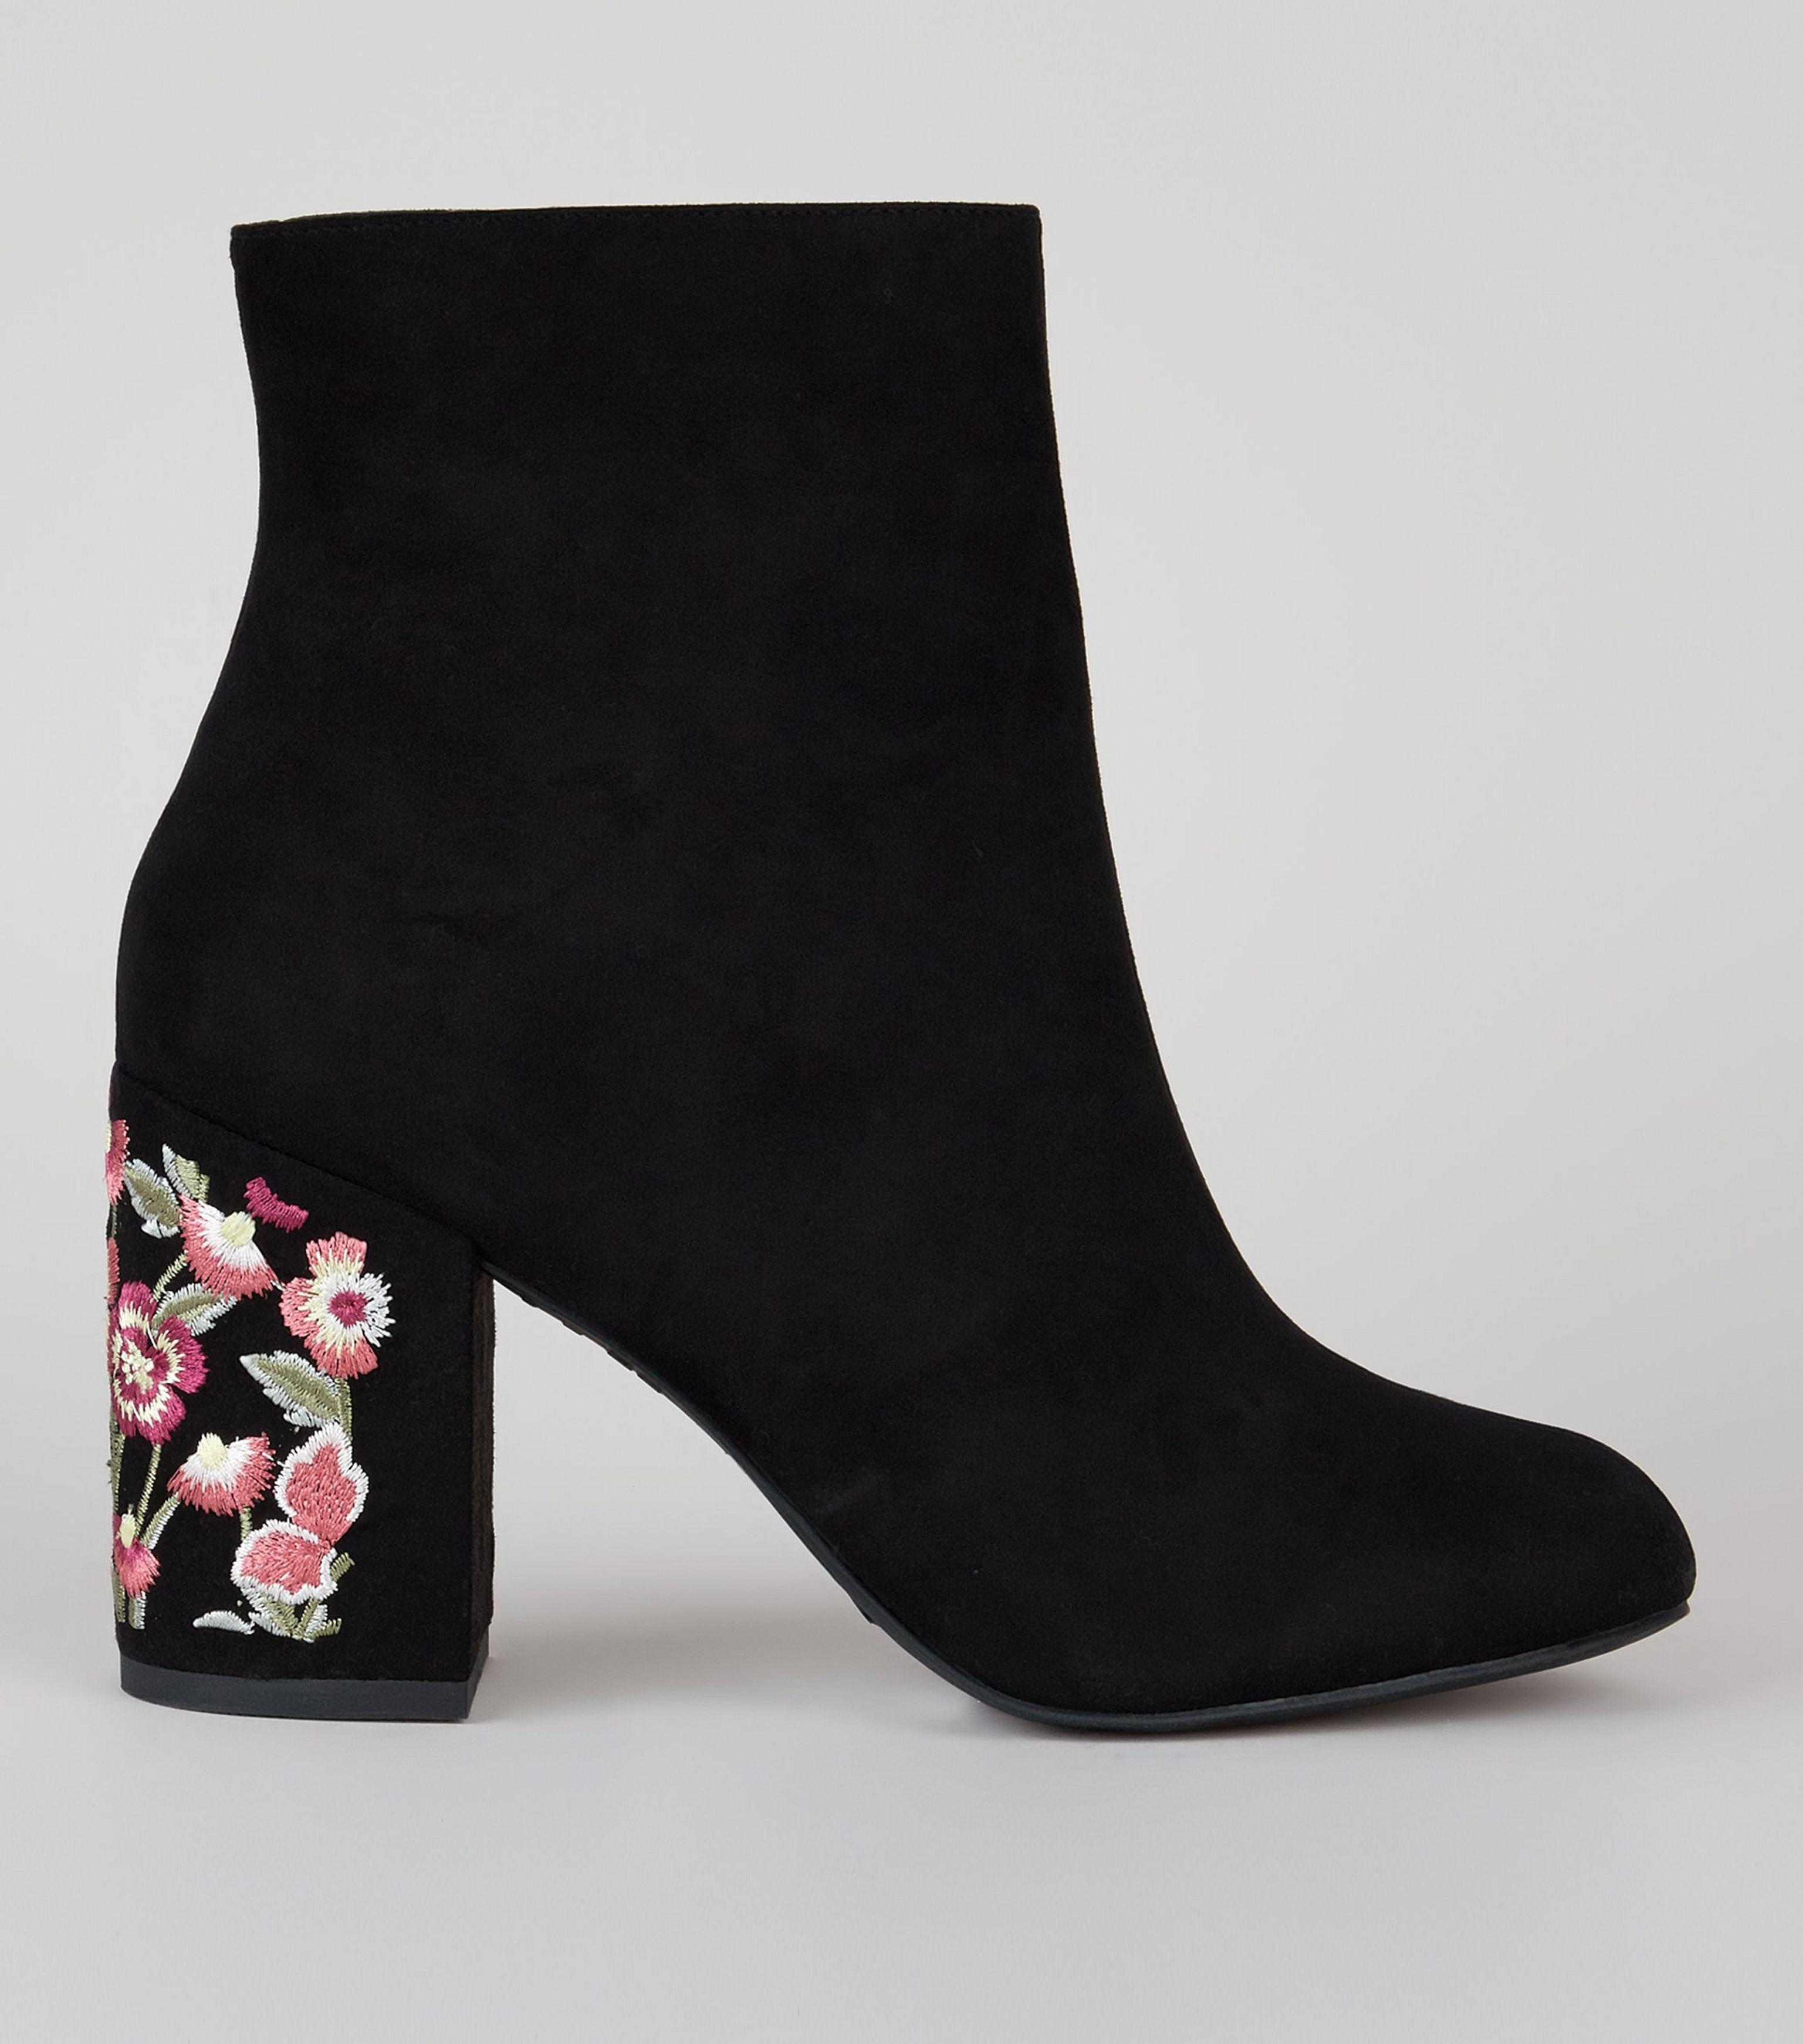 New Look Black Suedette Floral Embroidered Heel Boots - Lyst